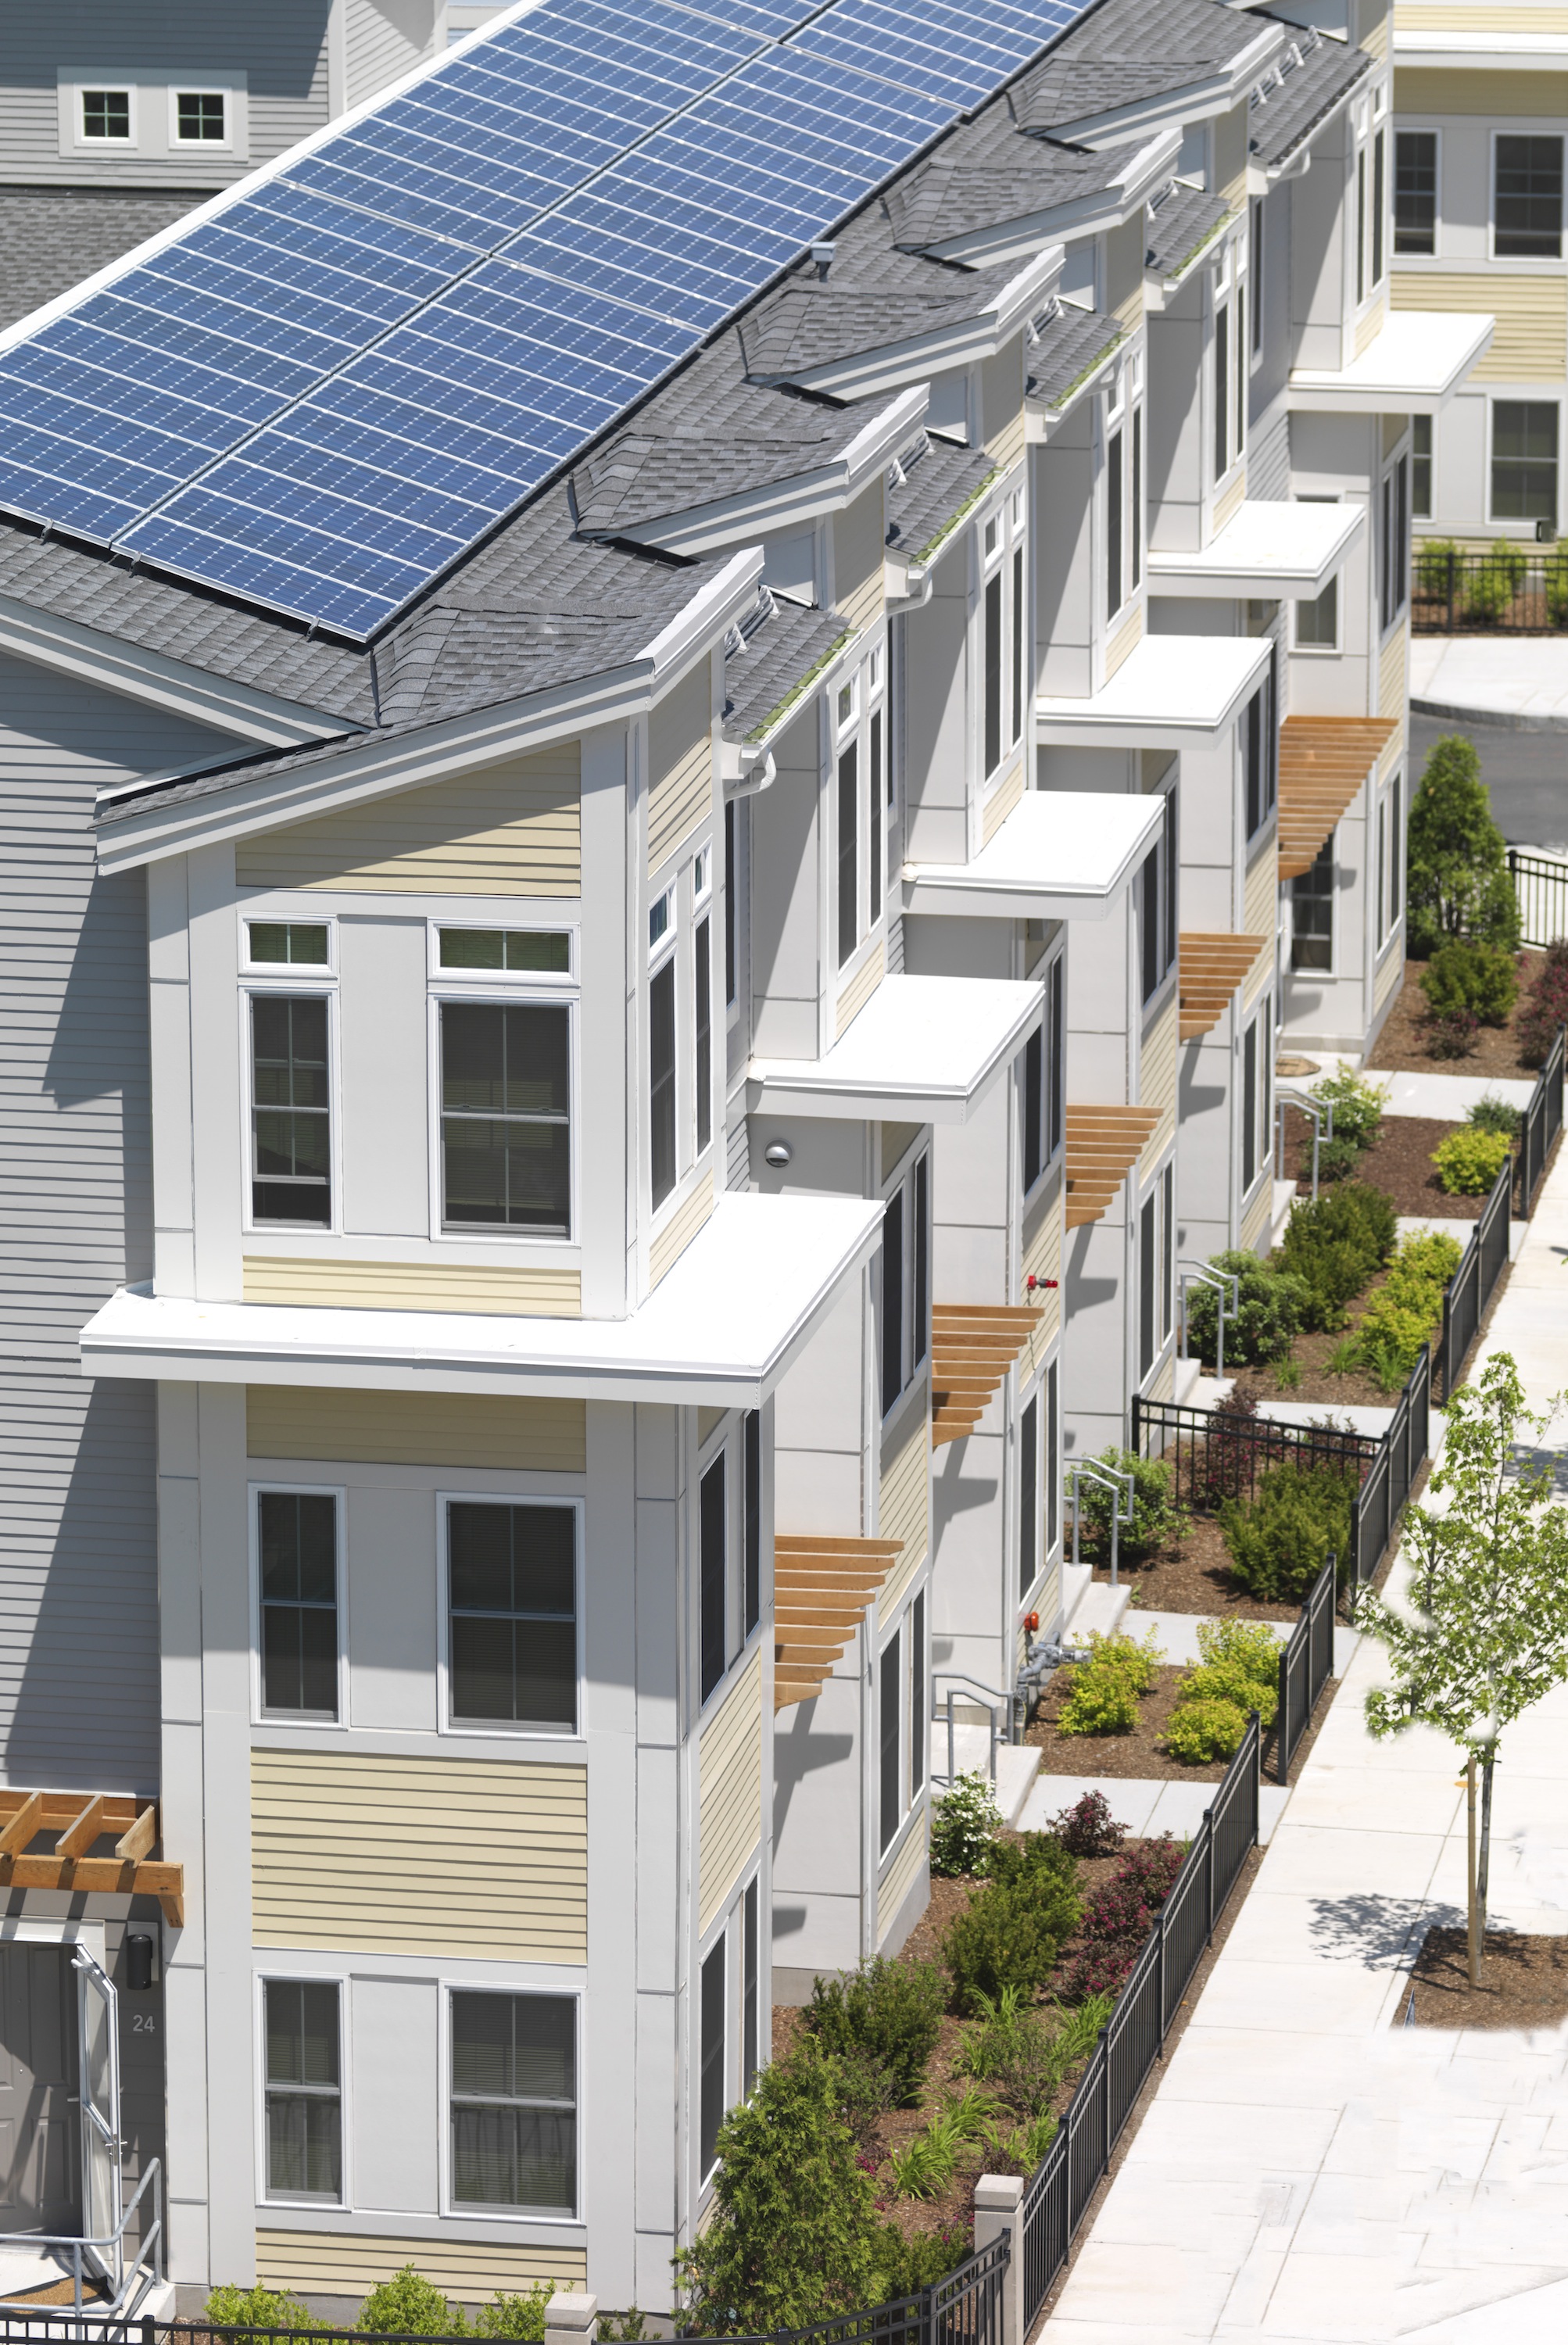 Rooftop solar panels are just one of the sustainability strategies employed by the project team for Homes at Old Colony